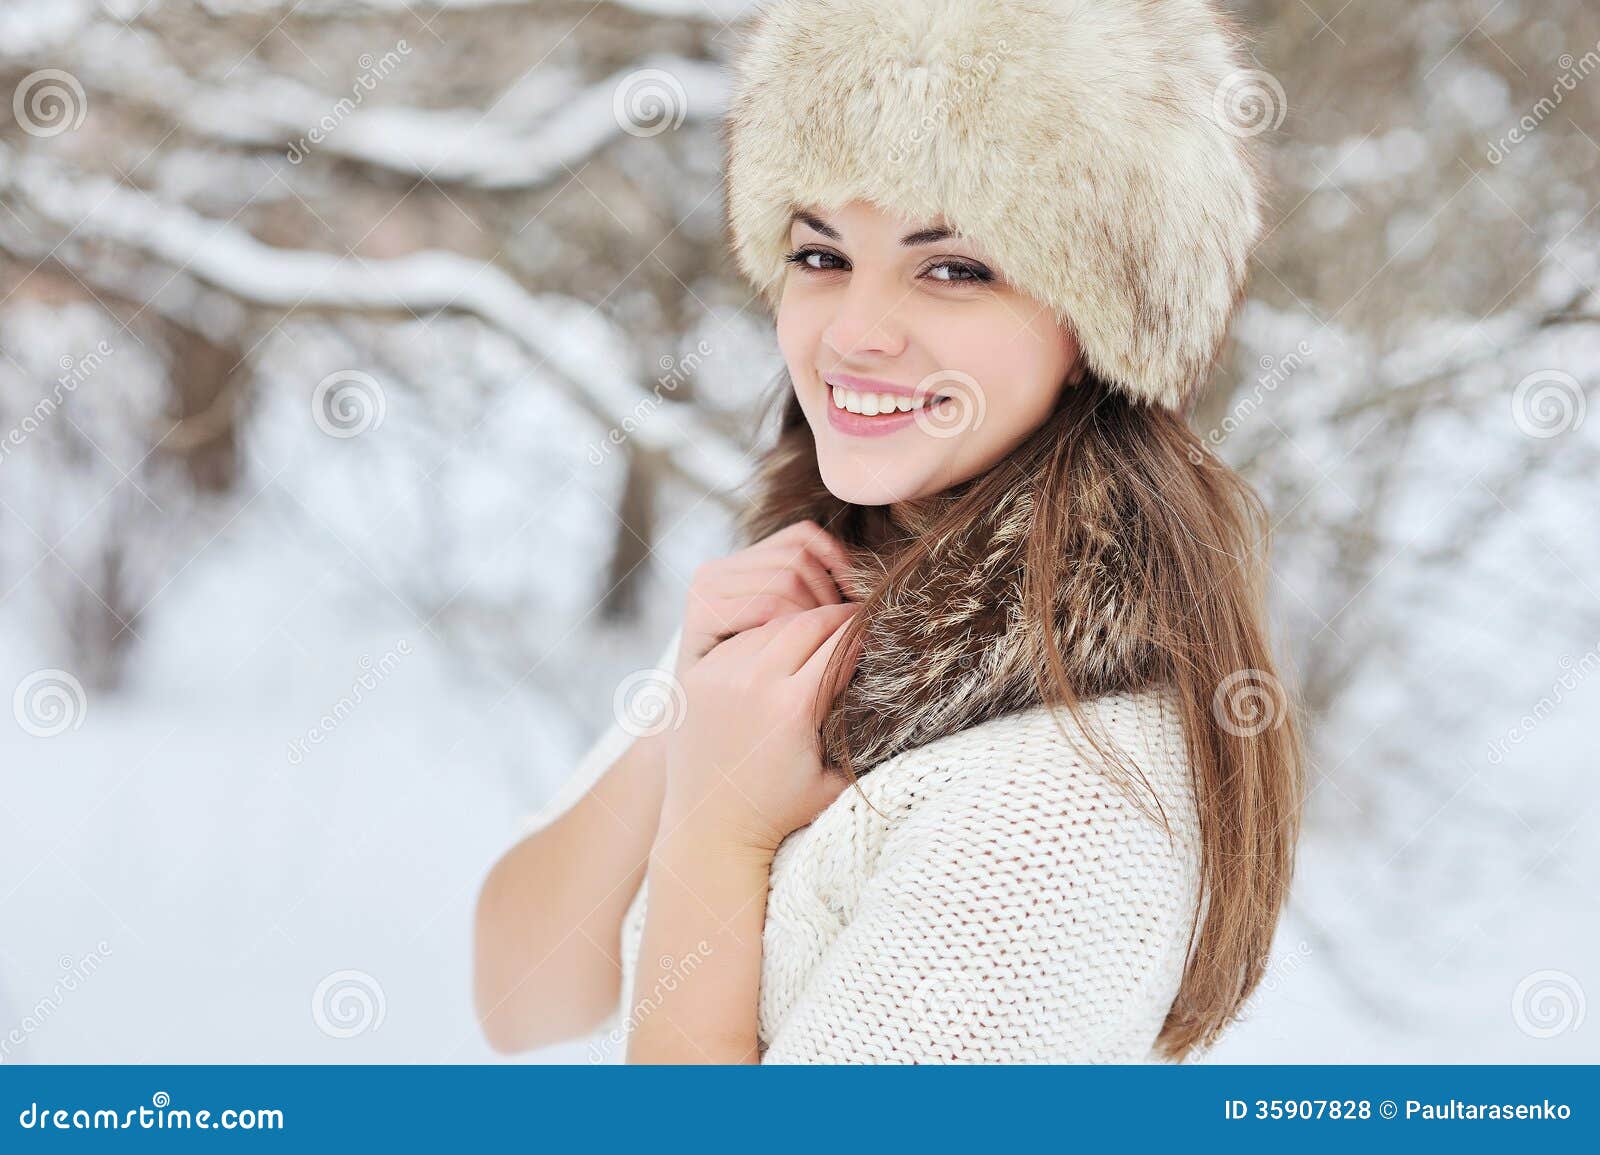 Beautiful Winter Portrait of Young Woman Stock Photo - Image of close ...